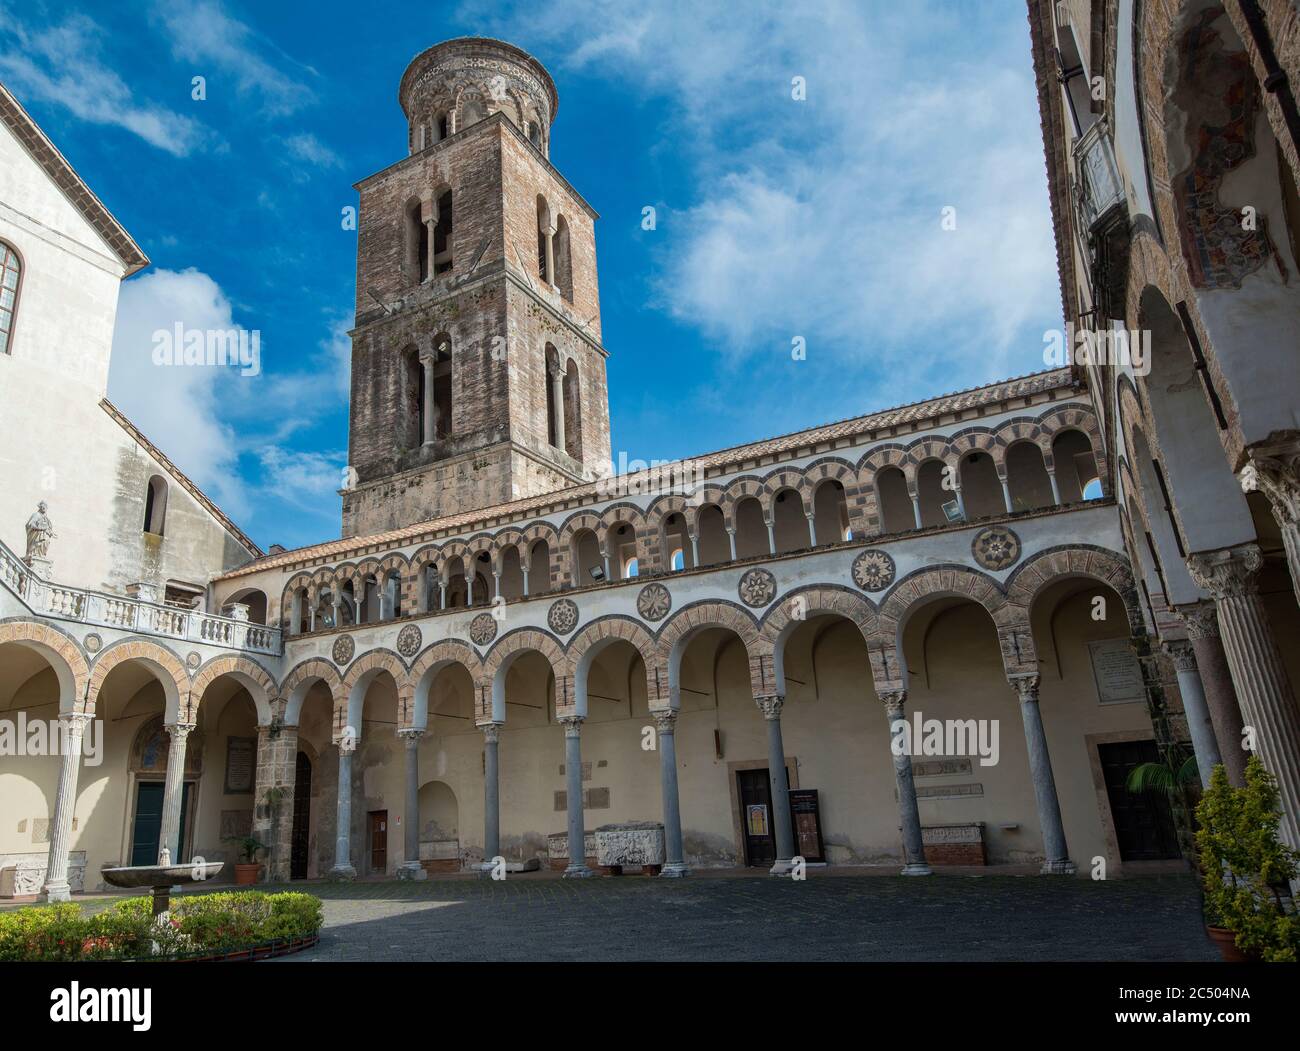 Cathedral of Saint Matthew (San Matteo) is the main church in the city of Salerno and a major tourist attraction, Salerno, Campania, Italy Stock Photo